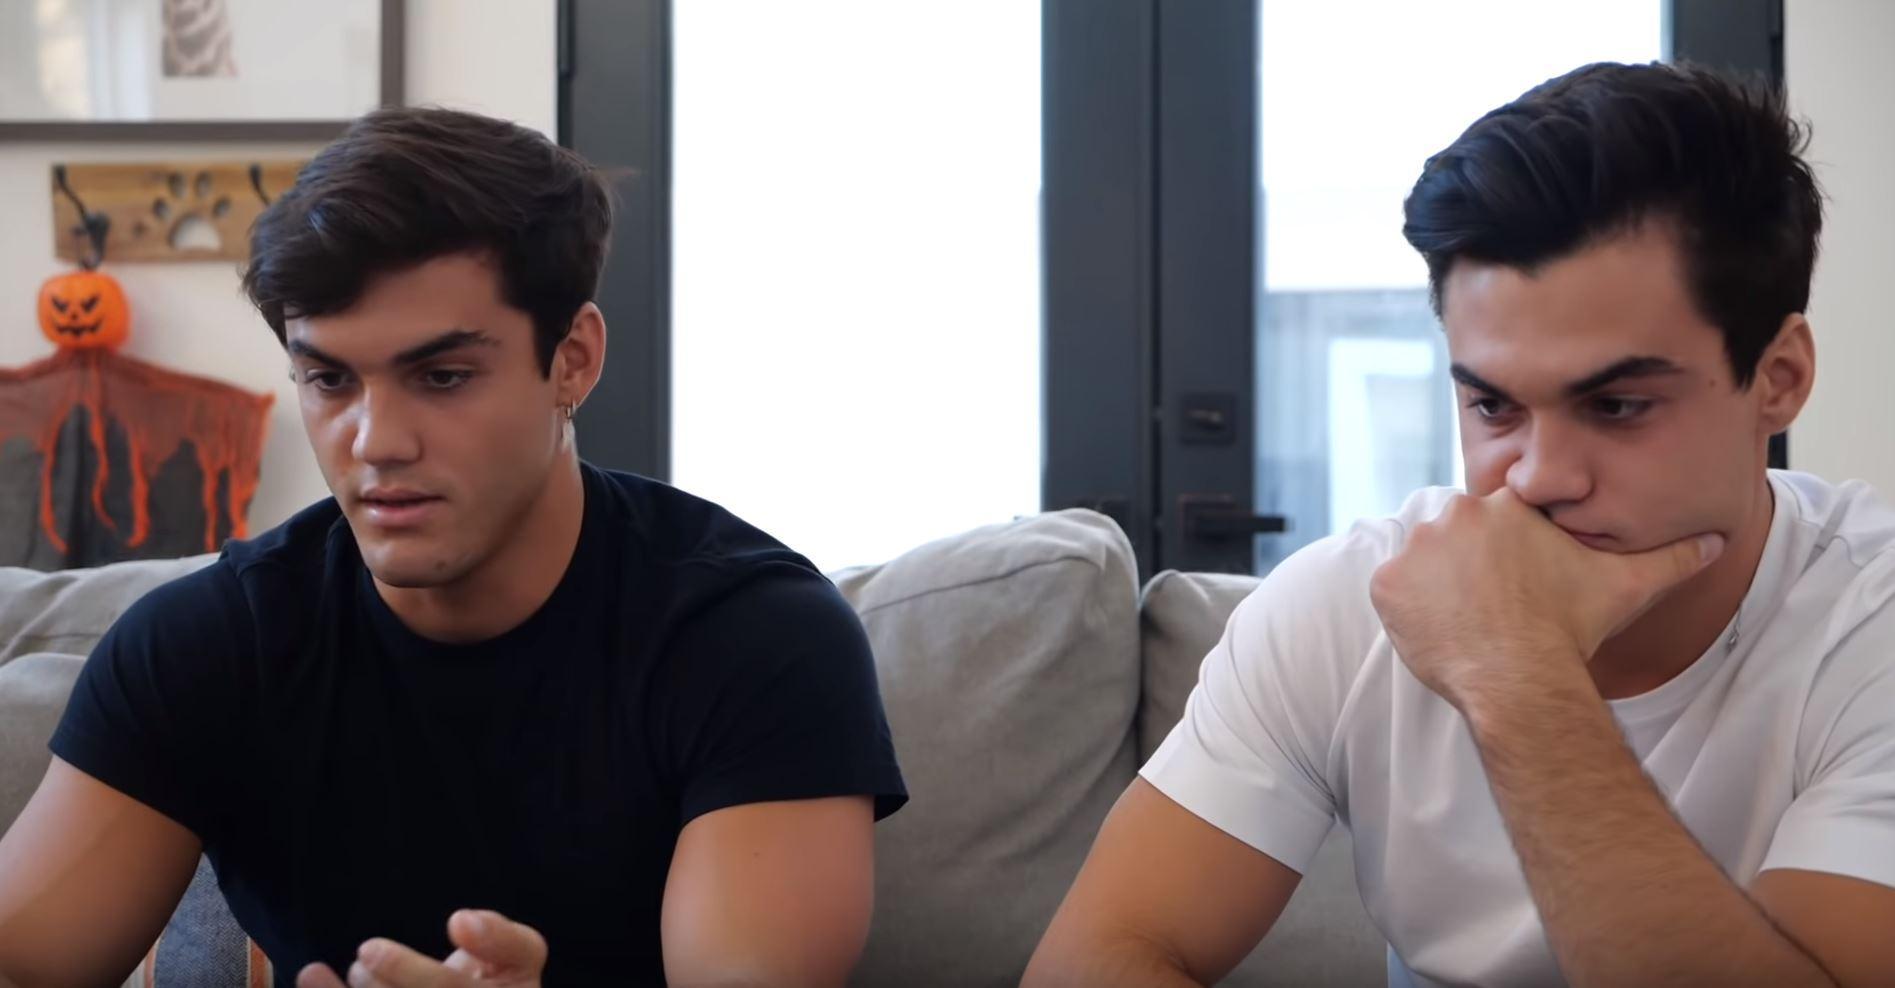 Dolan Twins announce major change to YouTube schedule in emotional ...